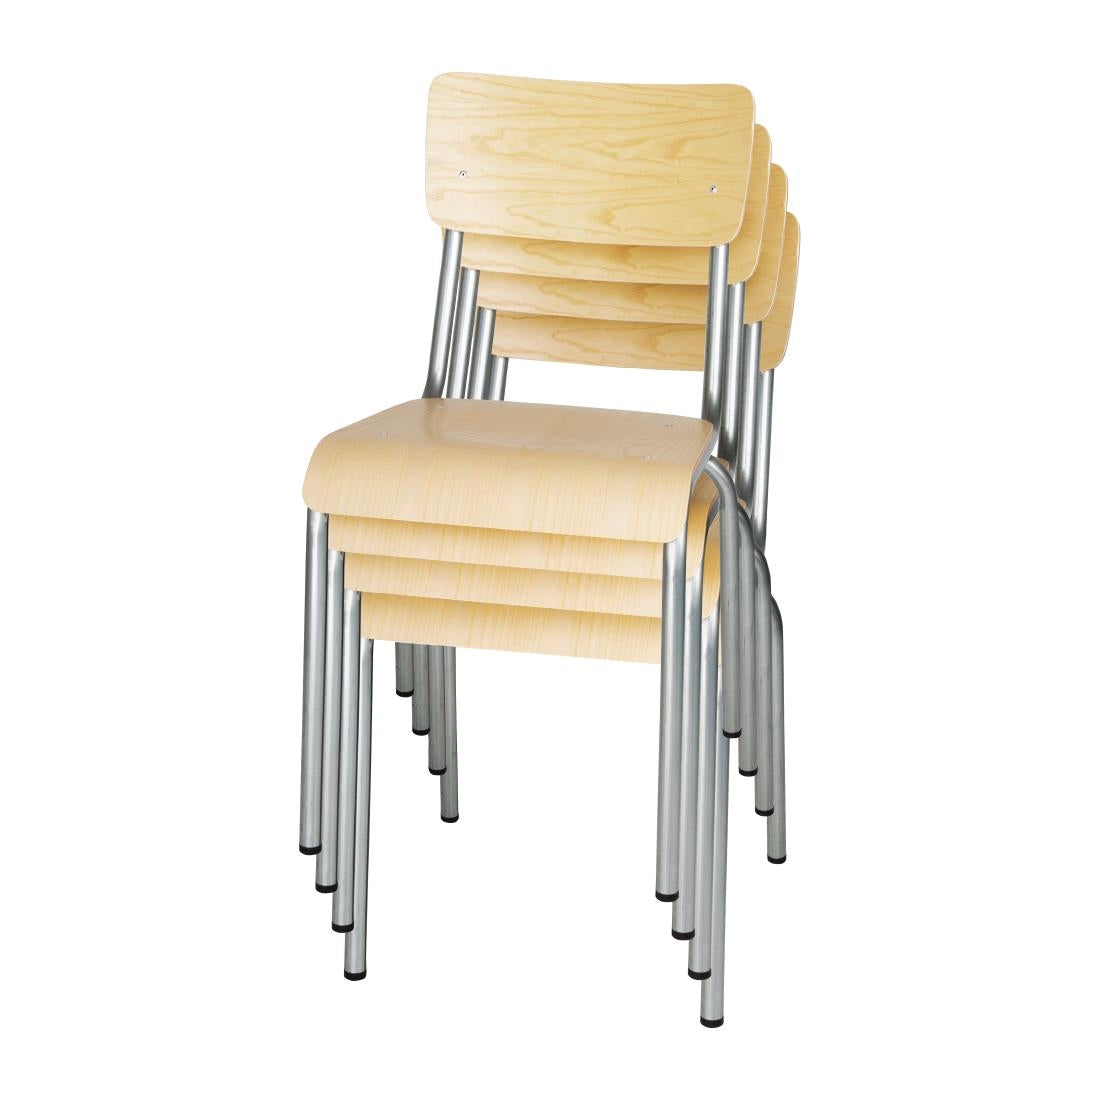 Bolero Cantina Side Chairs with Wooden Seat Pad and Backrest (Pack of 4) JD Catering Equipment Solutions Ltd